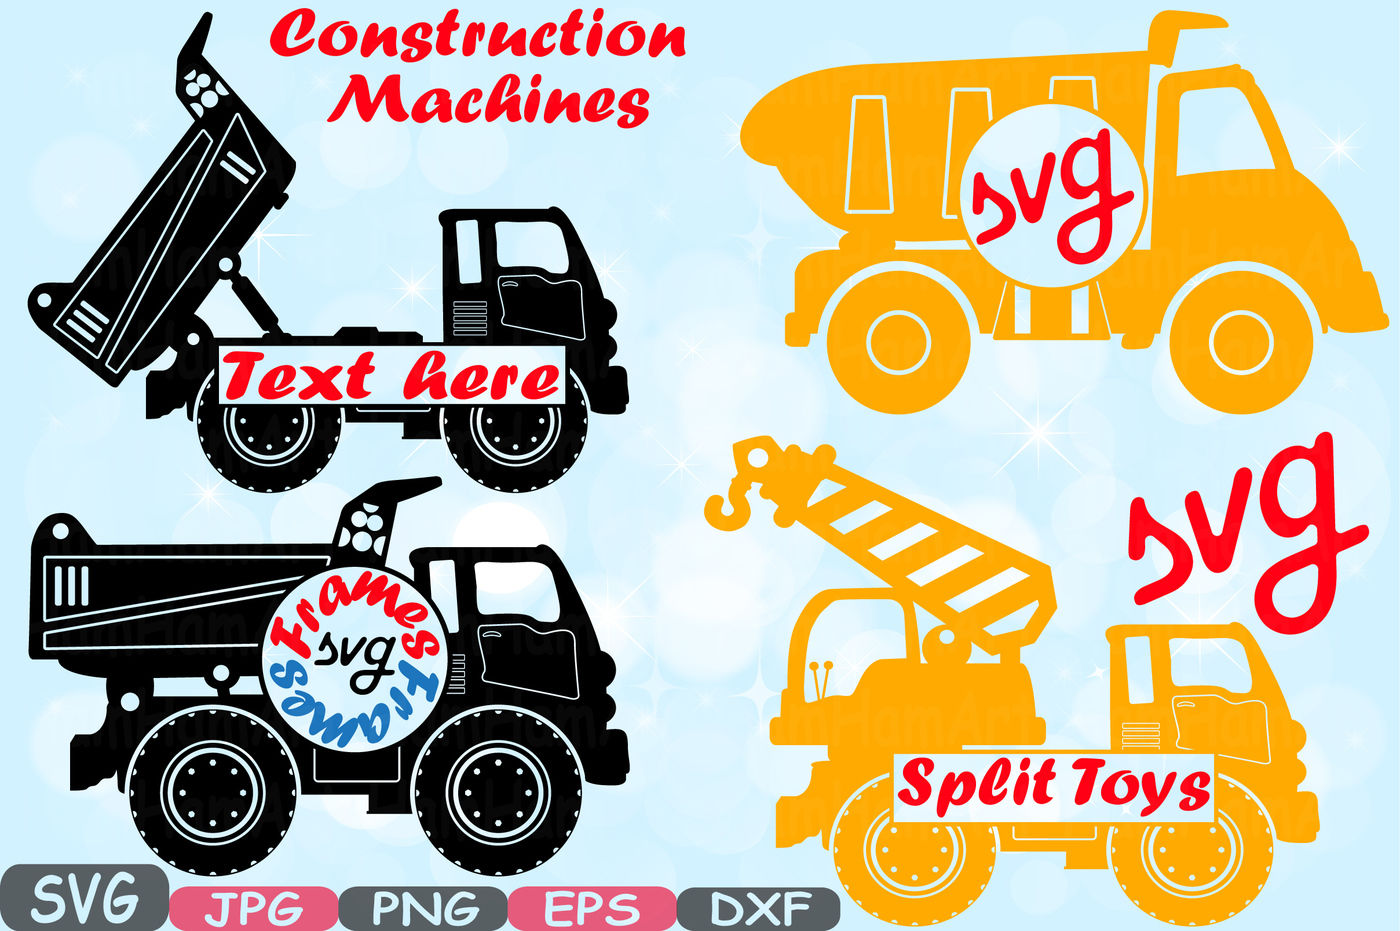 Construction Machines Circle Split Silhouette Svg File Cutting Files Dump Trucks Toy Toys Cars Excavator Stickers Builders Clipart 652s By Hamhamart Thehungryjpeg Com